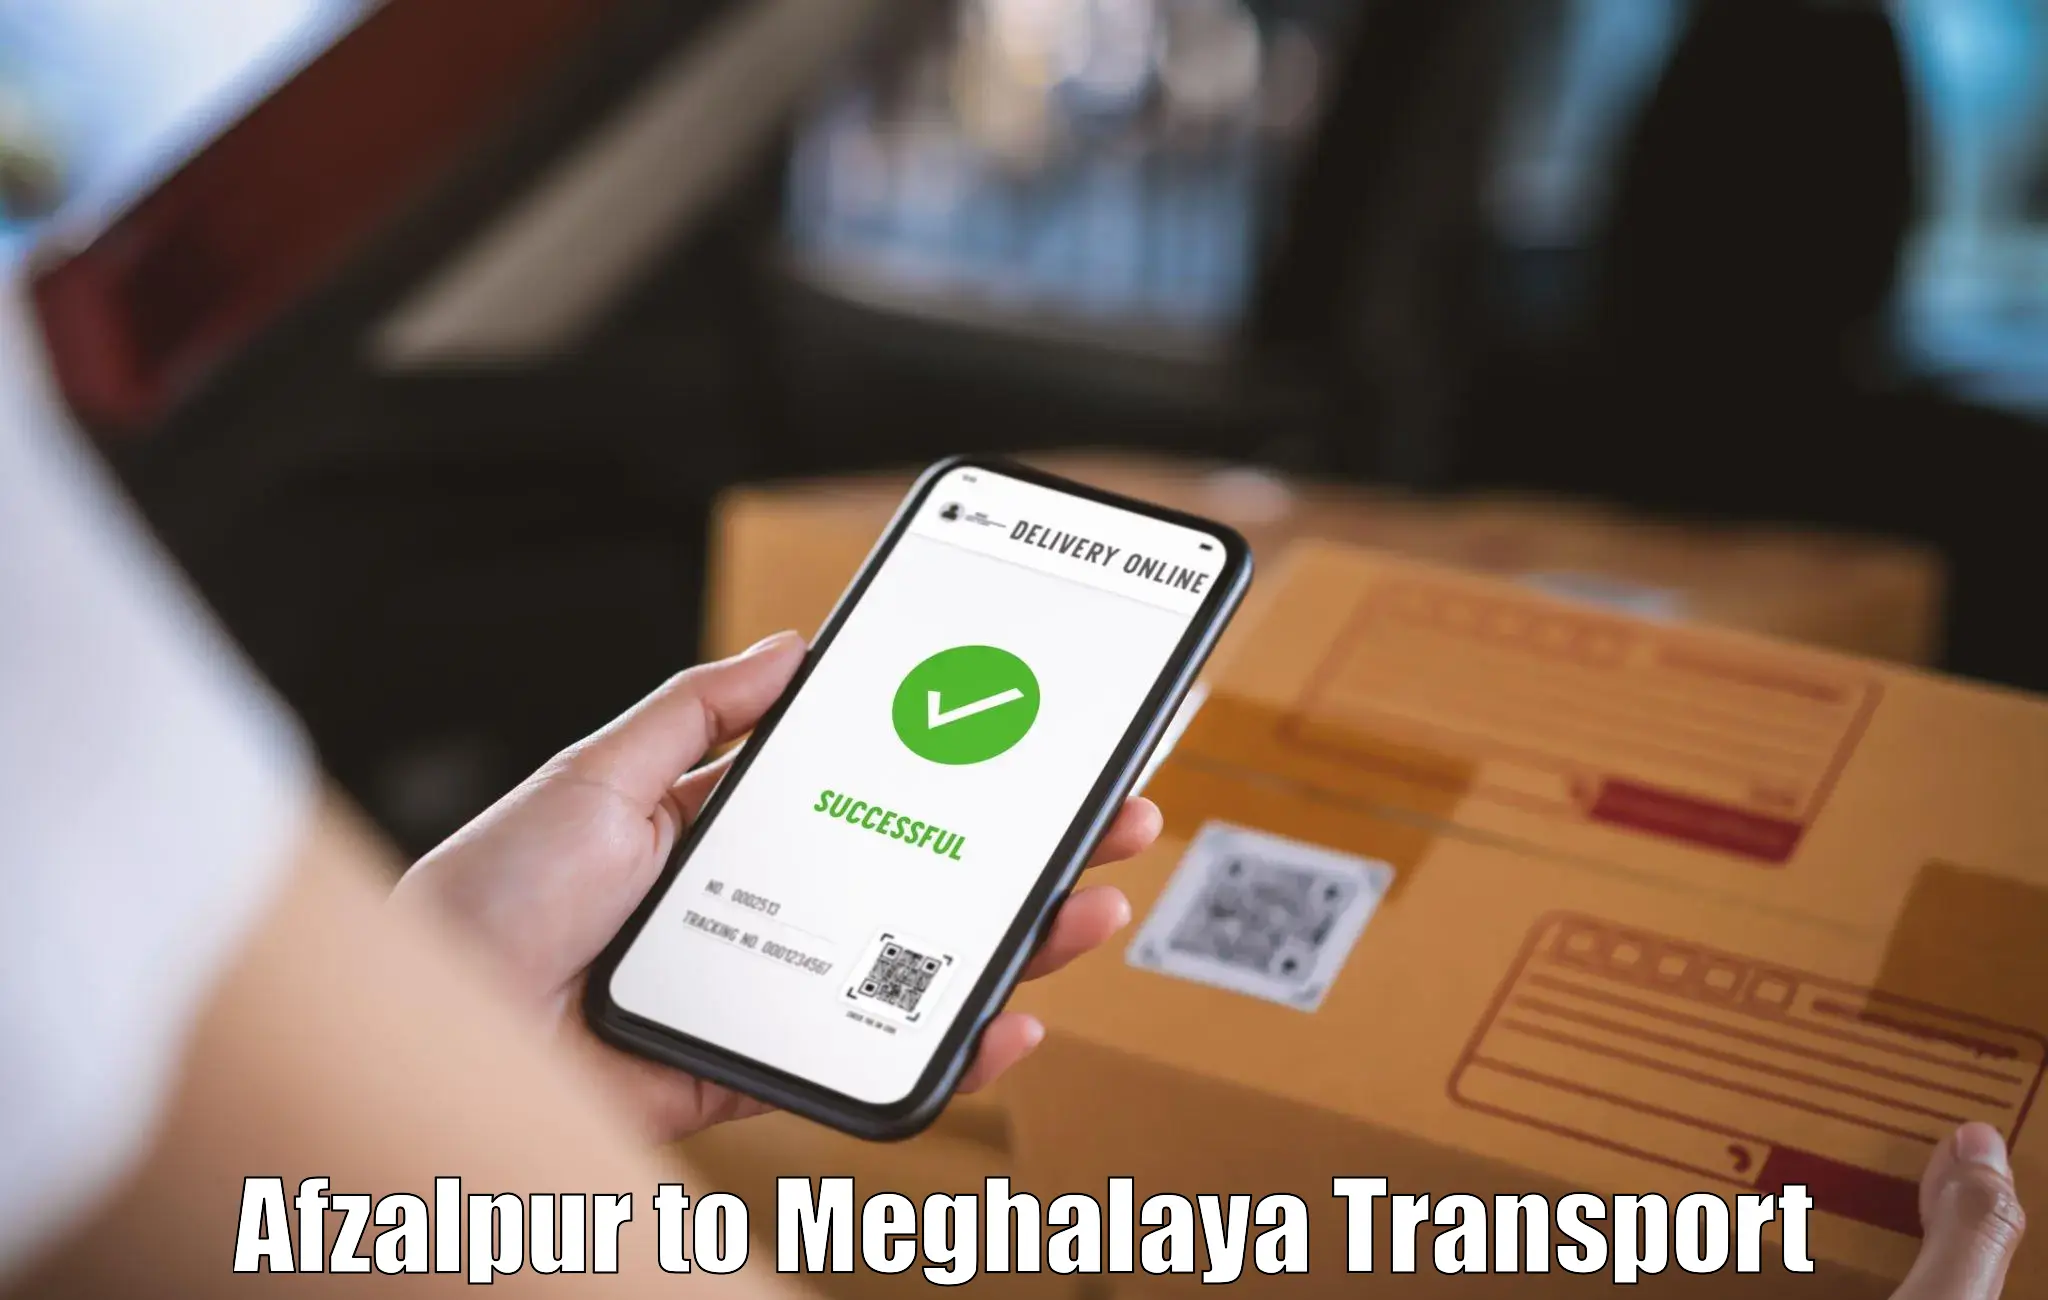 Air freight transport services Afzalpur to Meghalaya